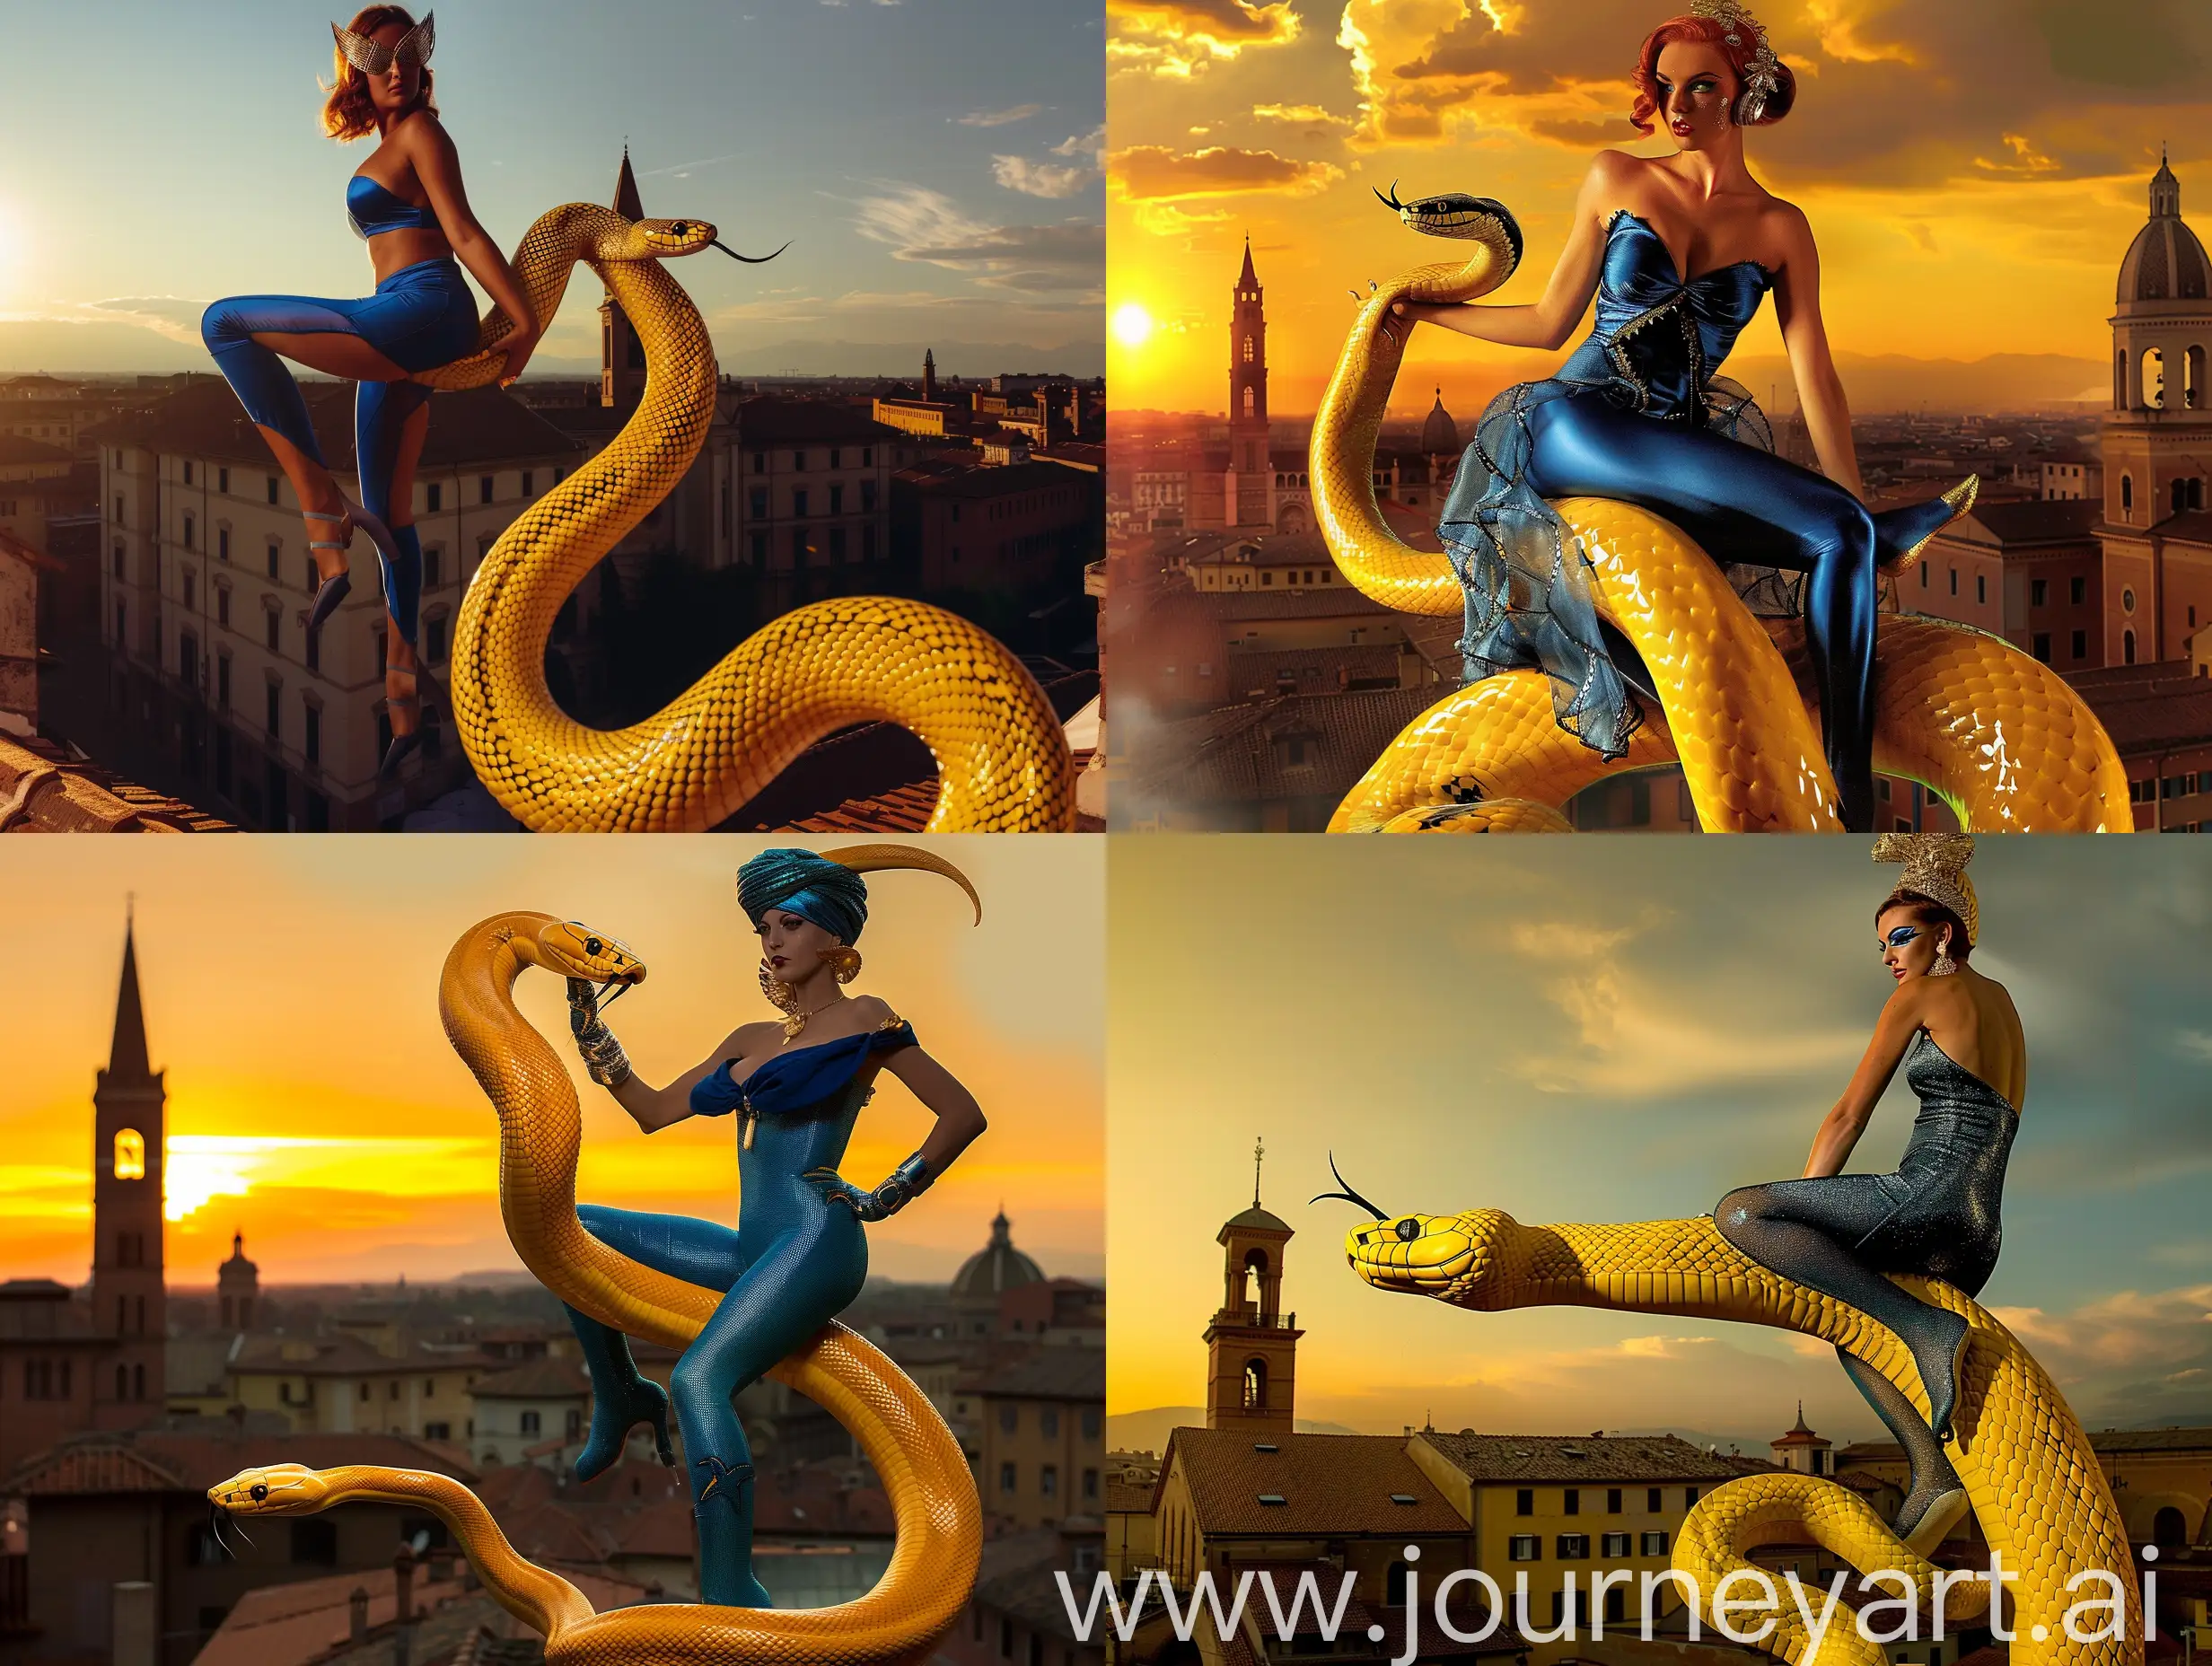 Glamorous-DJ-Miss-Monique-in-Tight-Blue-Dress-Riding-a-Yellow-Snake-at-Sunset-in-the-Art-Deco-City-of-Bologna